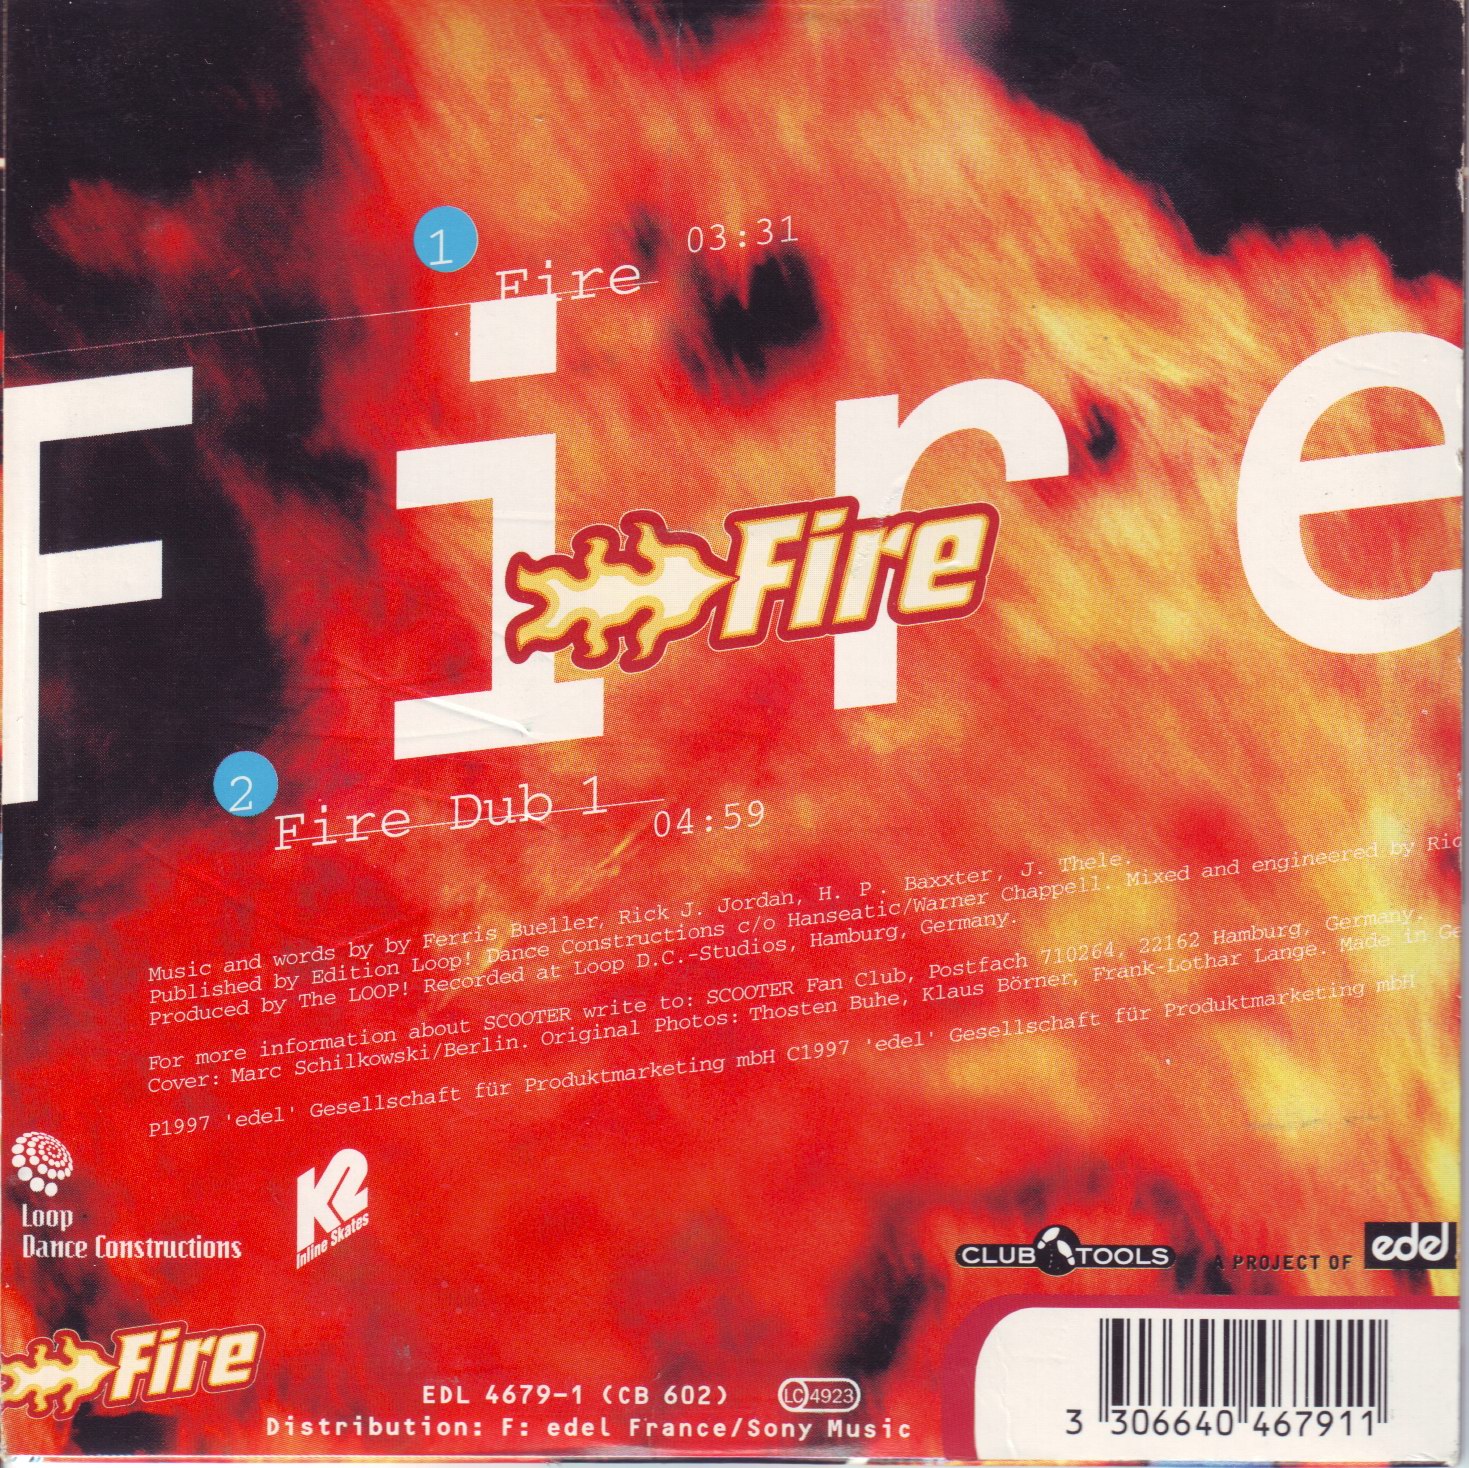 Скутер fire. Scooter Fire 1997. Scooter Fire обложка. Scooter Fire Single. Fire Remastered Scooter.